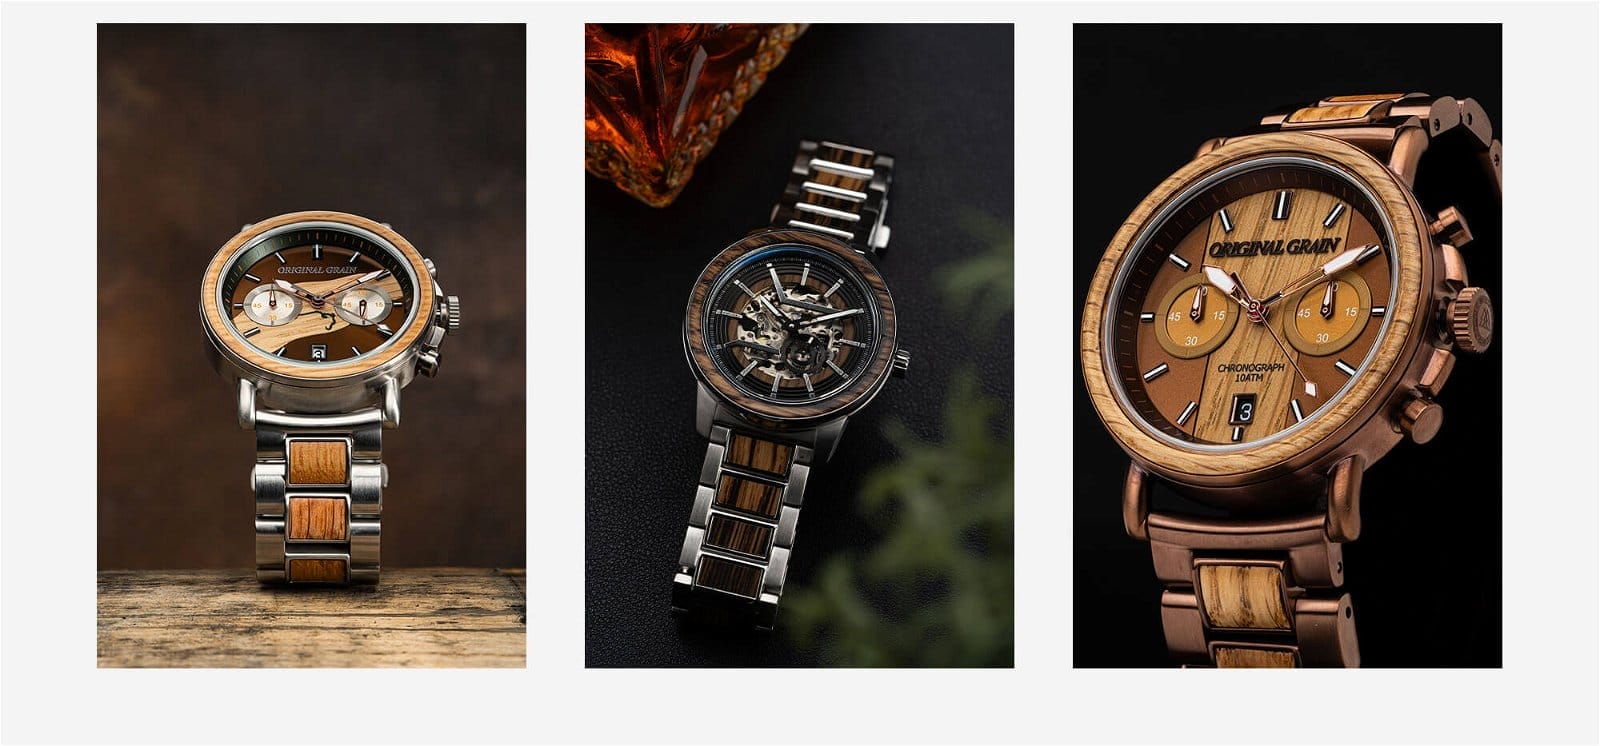 Original Grain's watches and rings Made with wood from WHISKEY barrels